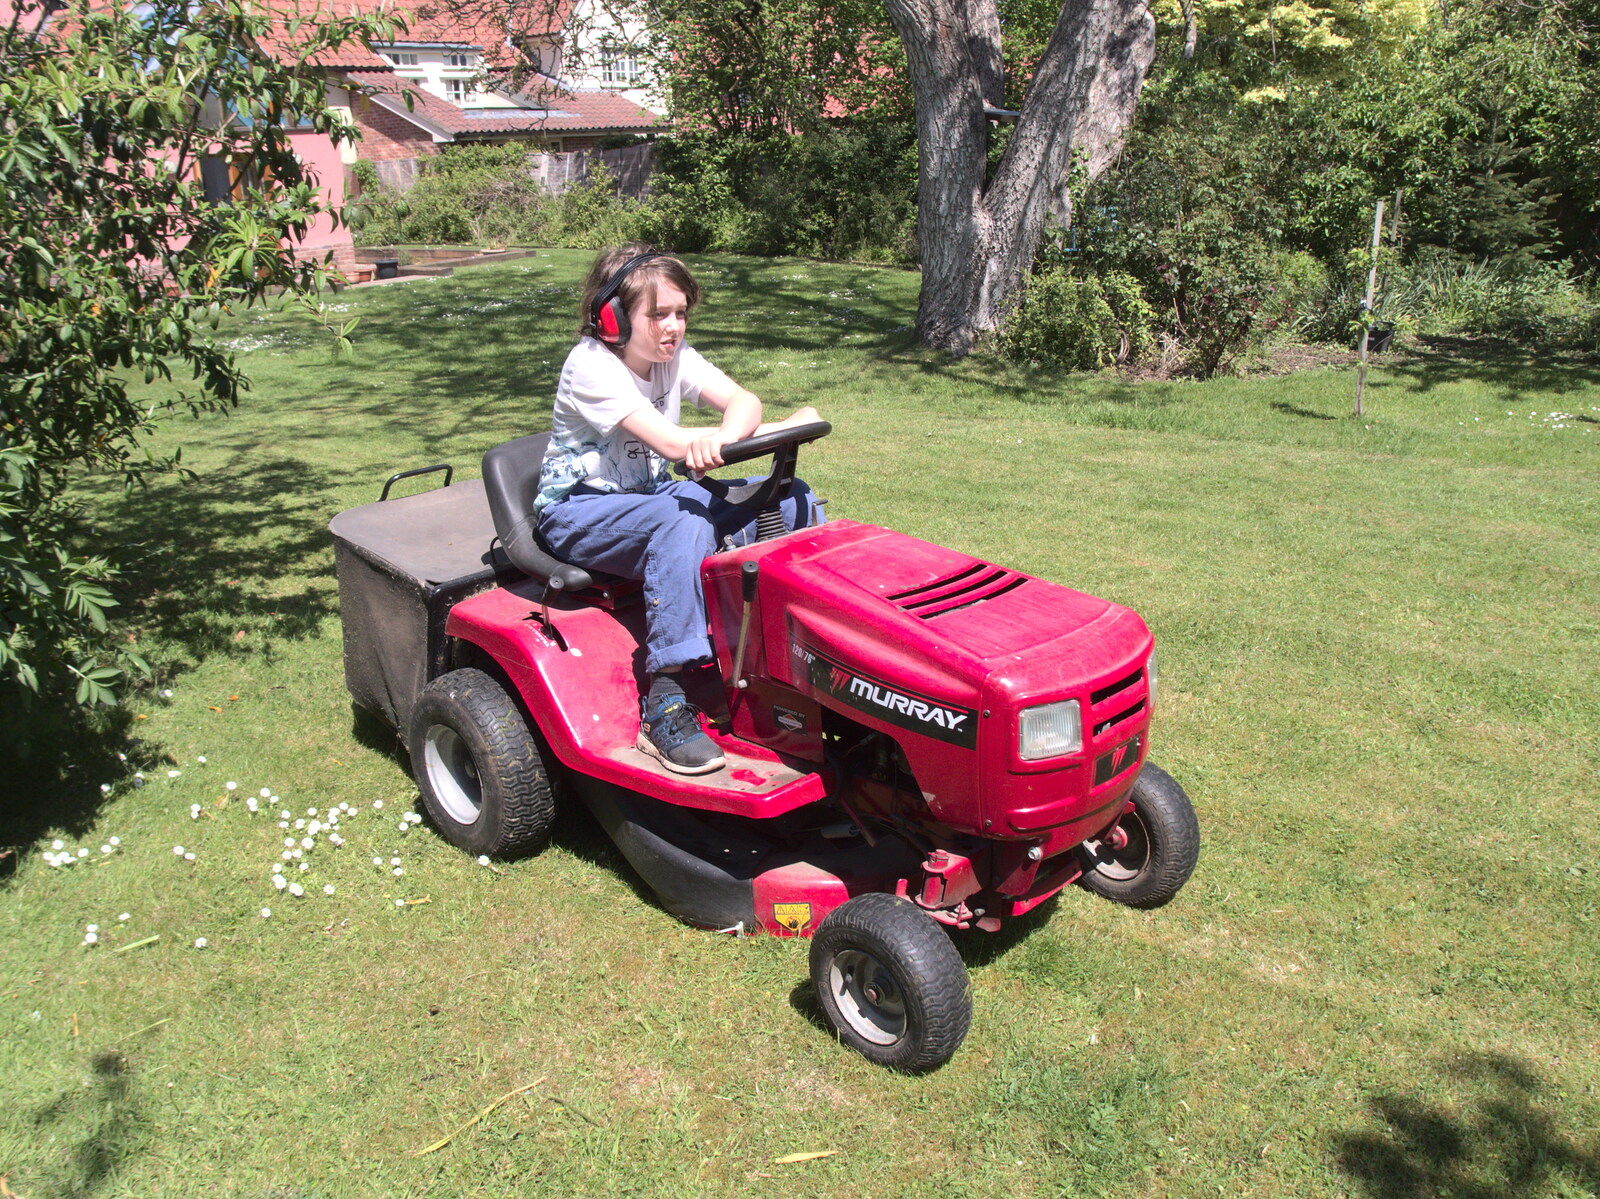 Fred on the lawnmower from Garden Centres, and Hamish Visits, Brome, Suffolk - 28th May 2021